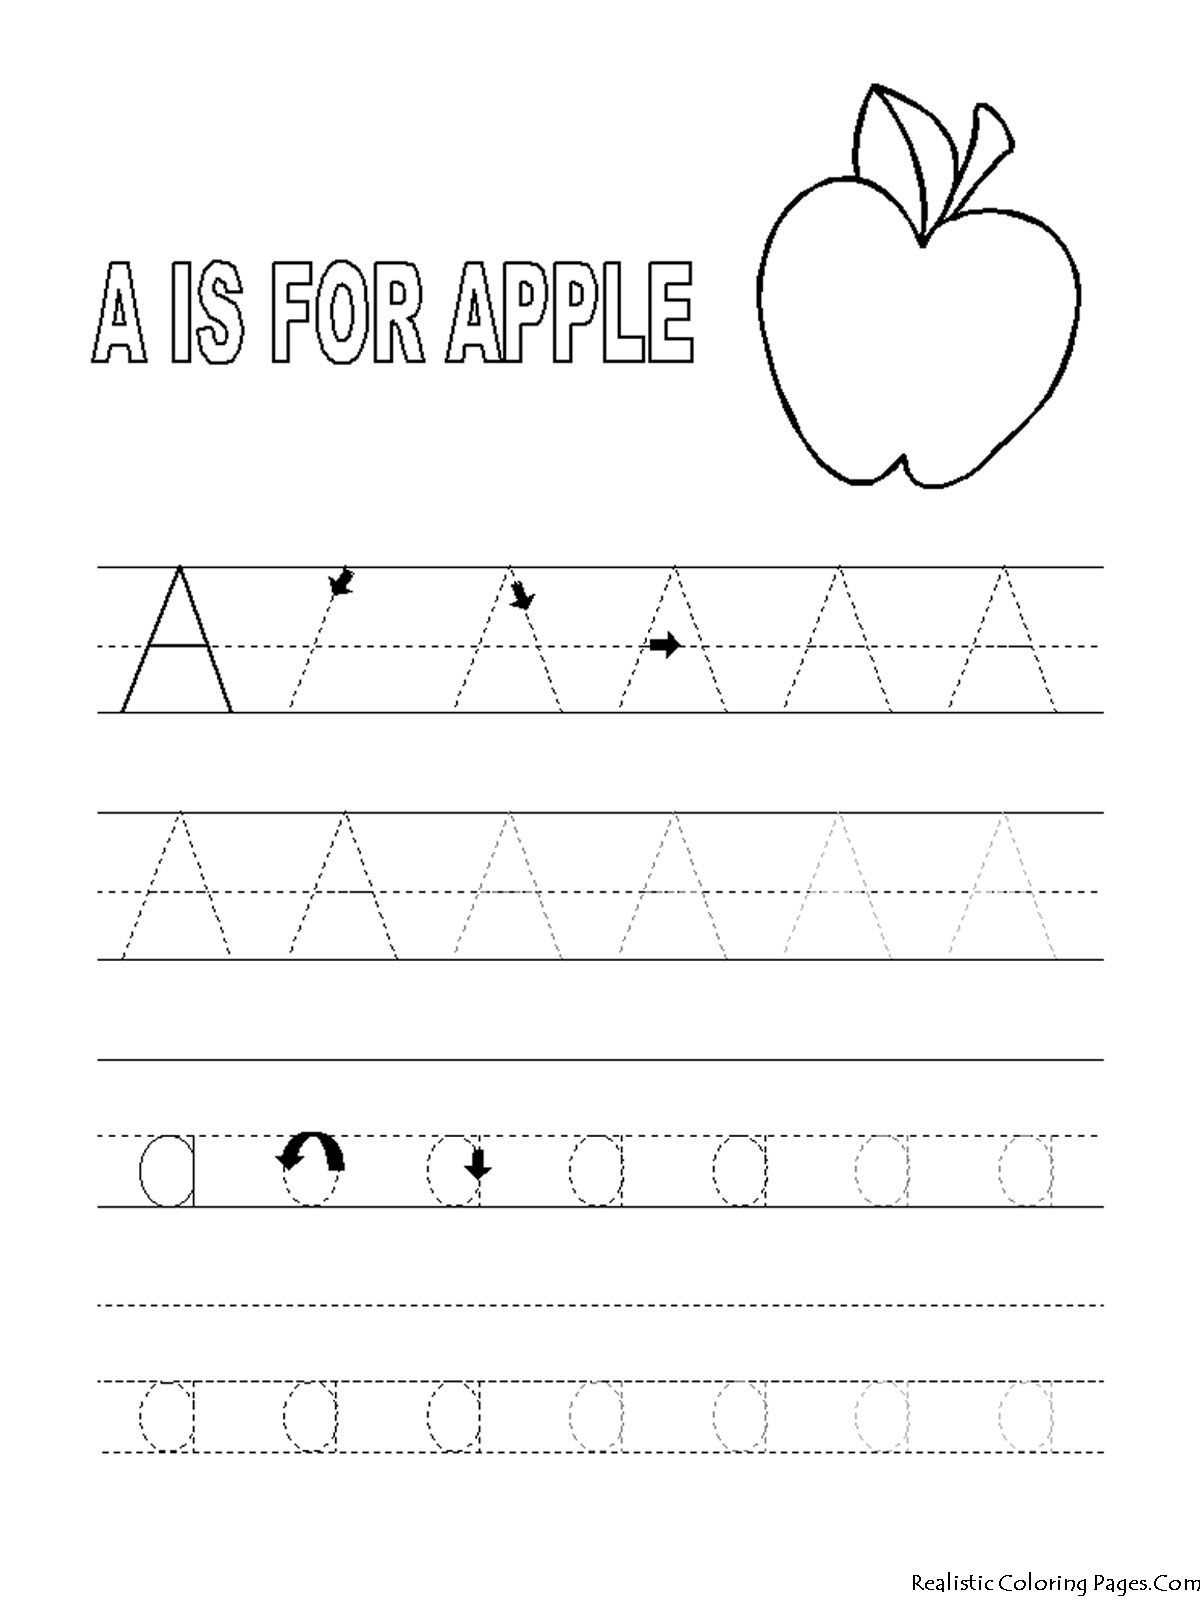 Apple clipart capital letter. Alphabet tracer pages a